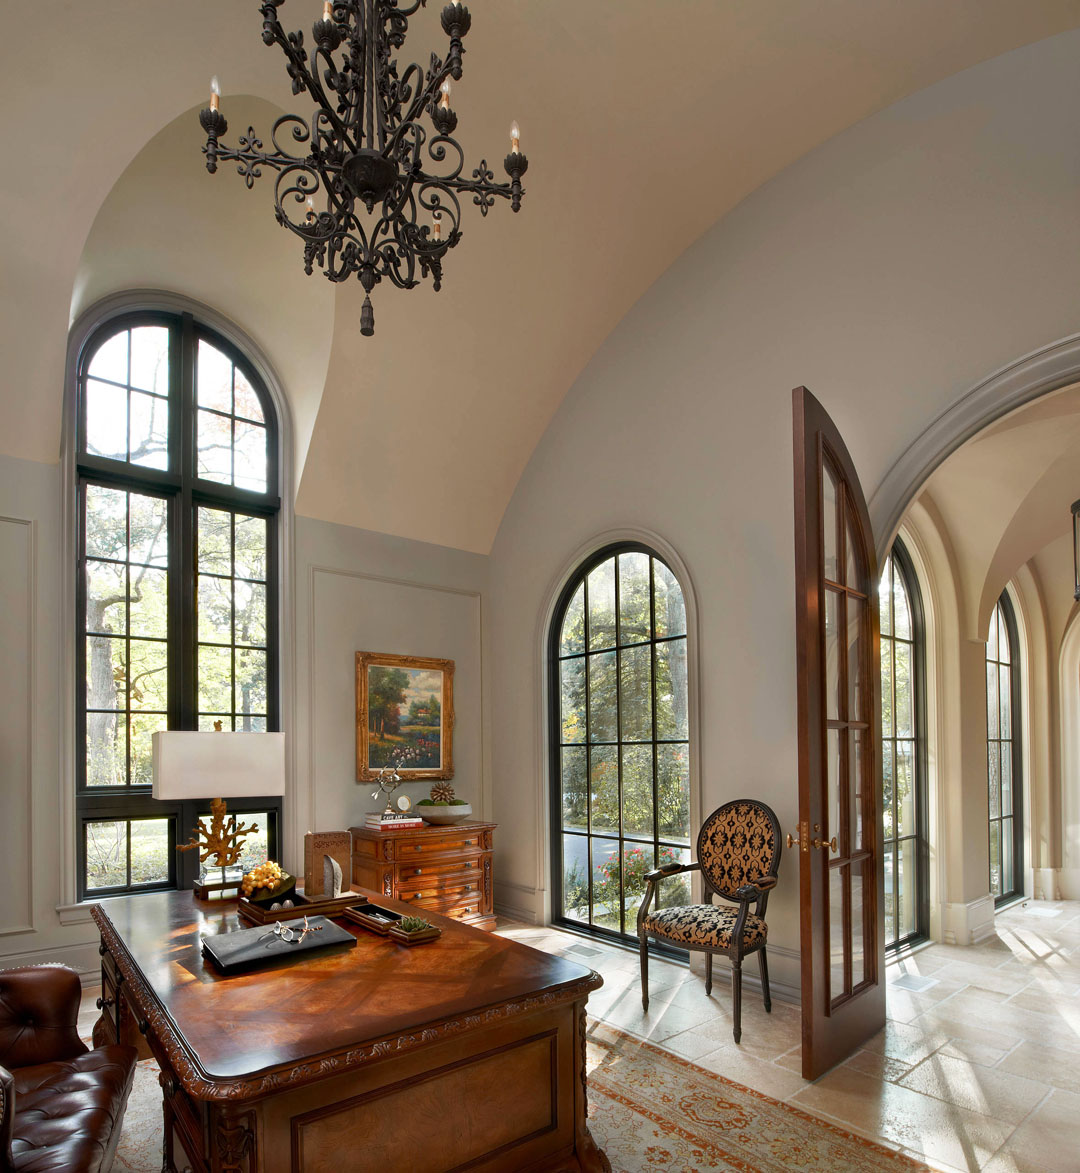 Floor-to-Ceiling Double Arched Windows